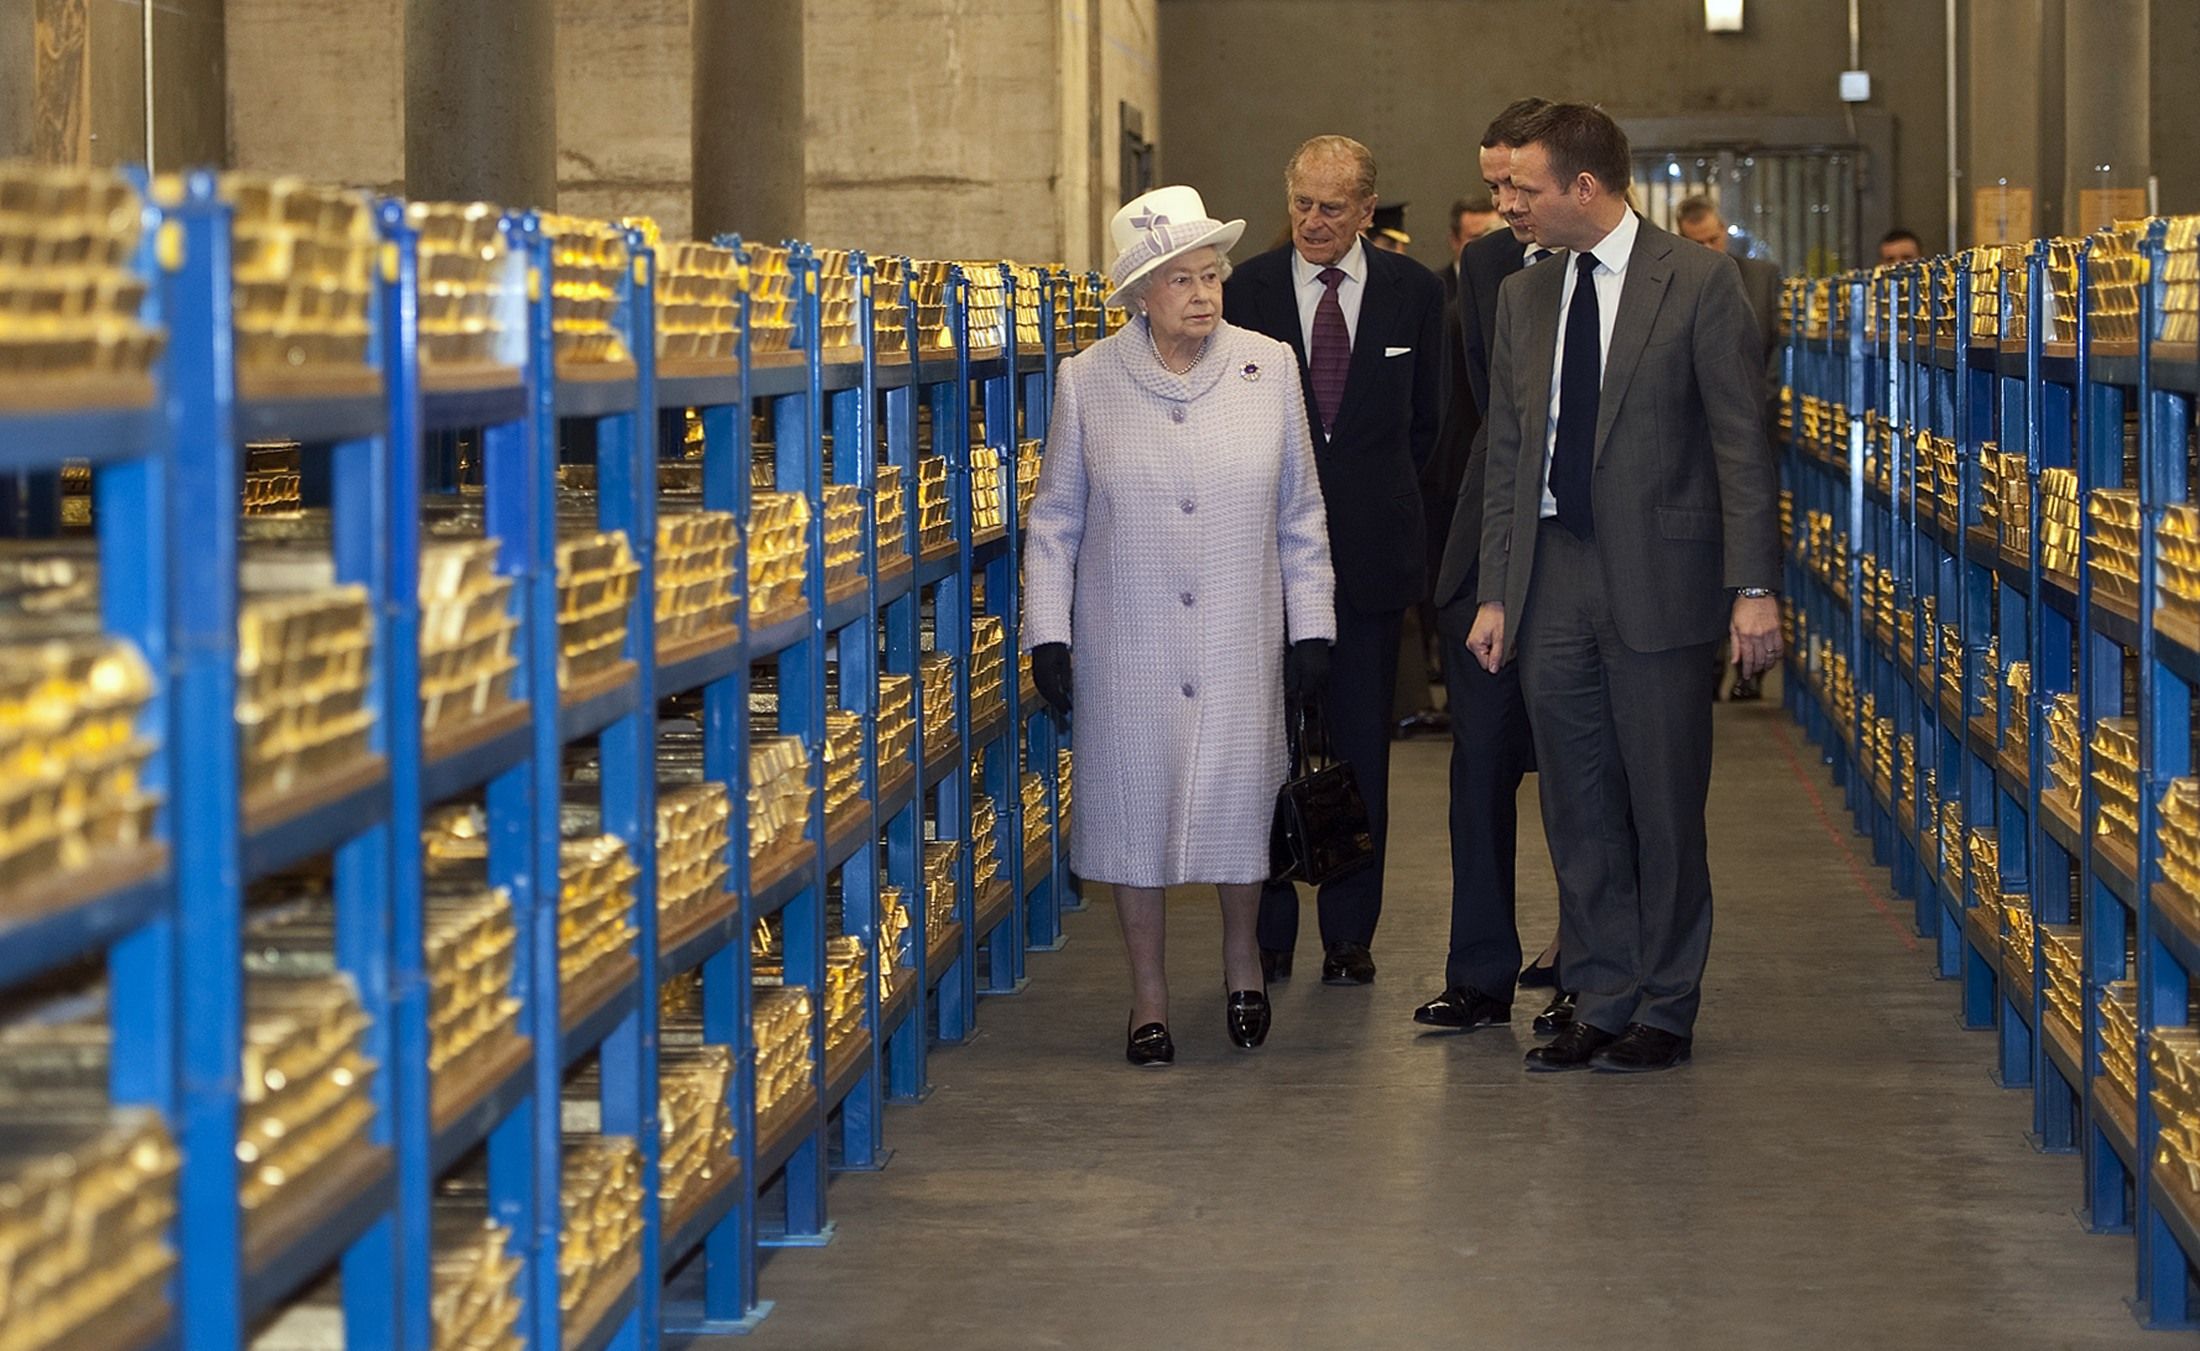 The Queen was escorted by financial and monetary official during her tour, the eighth of her lifetime